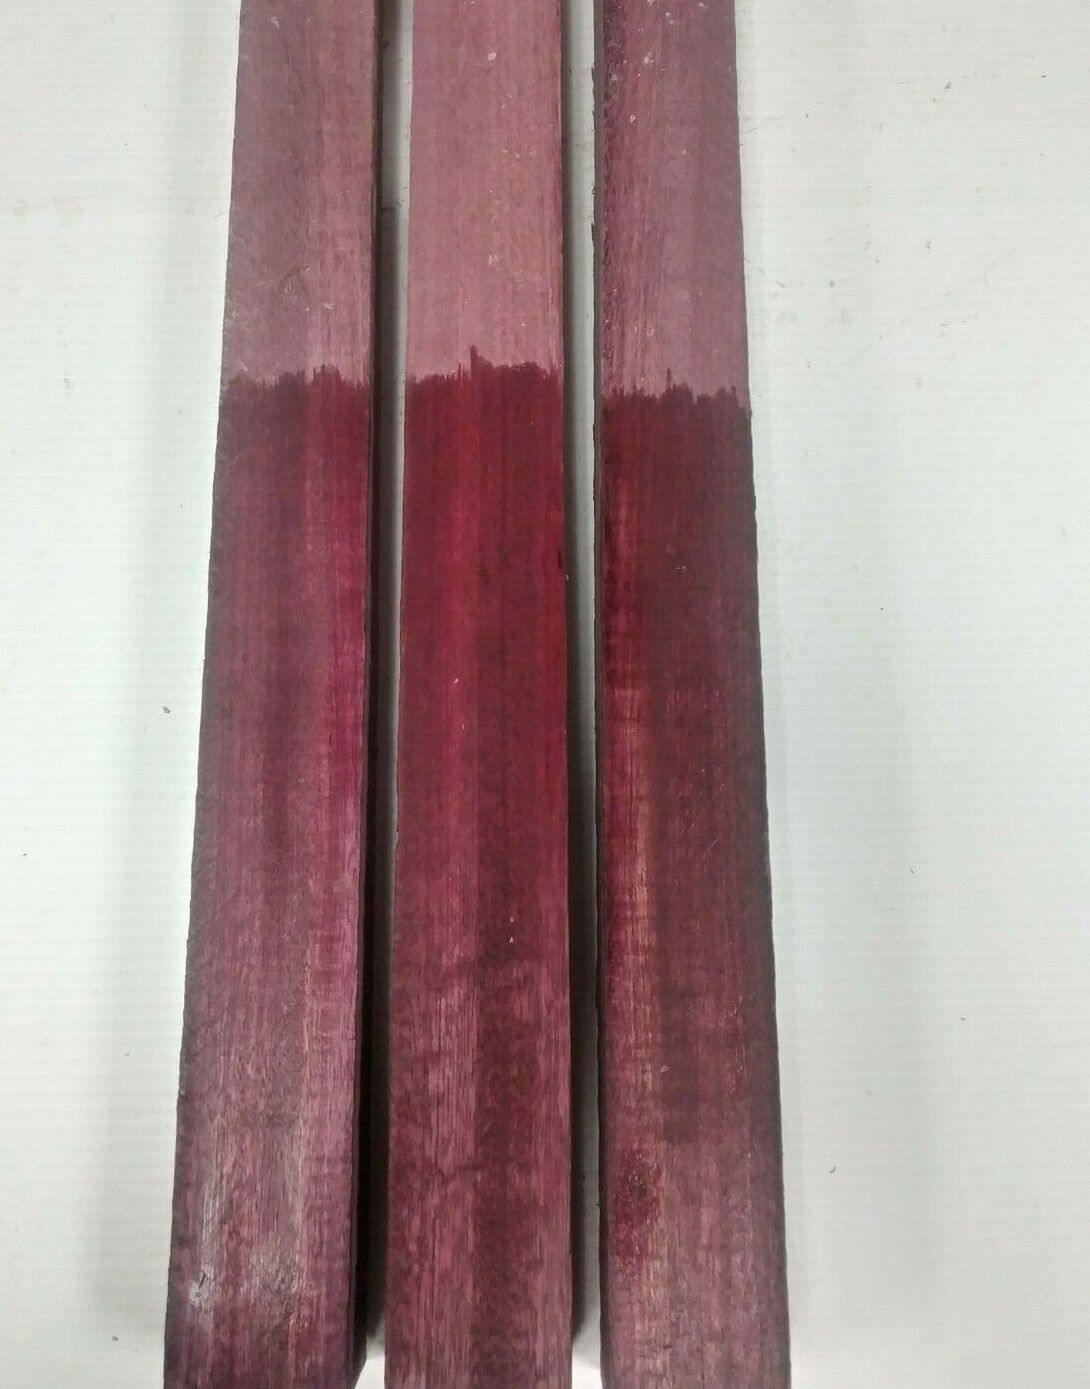 Pack of 3, Purpleheart Thin Dimensional Lumber Board Wood Blank 3/4" x 2" x 16" EXOTIC WOOD ZONE Does Not Apply - фотография #2